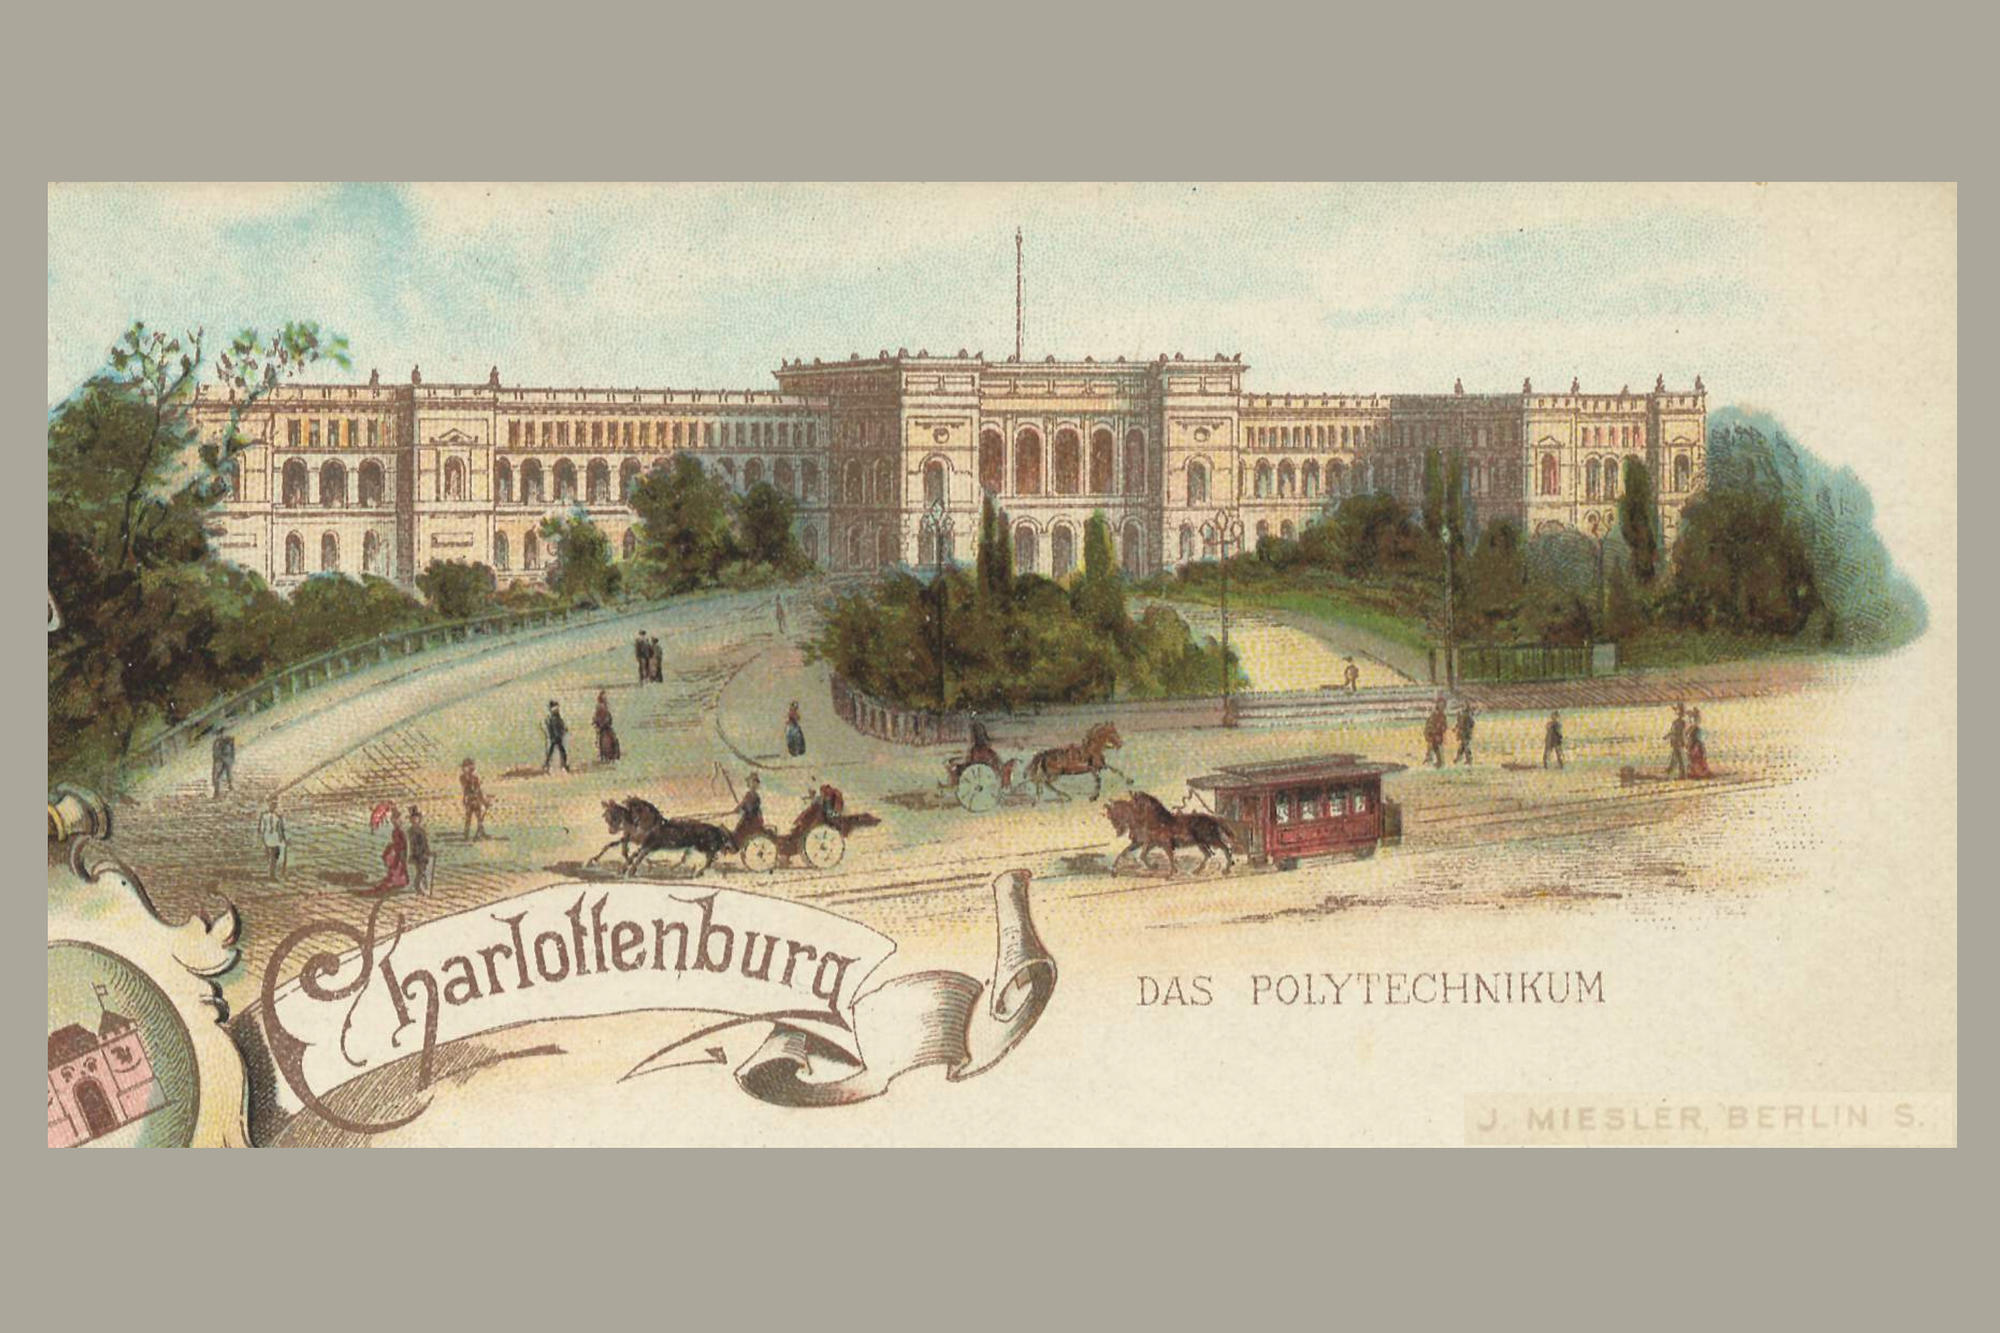 The representative polytechnic in Charlottenburg, built between 1878 and 1884, testified to the growing self-confidence of universities as academic institutions.